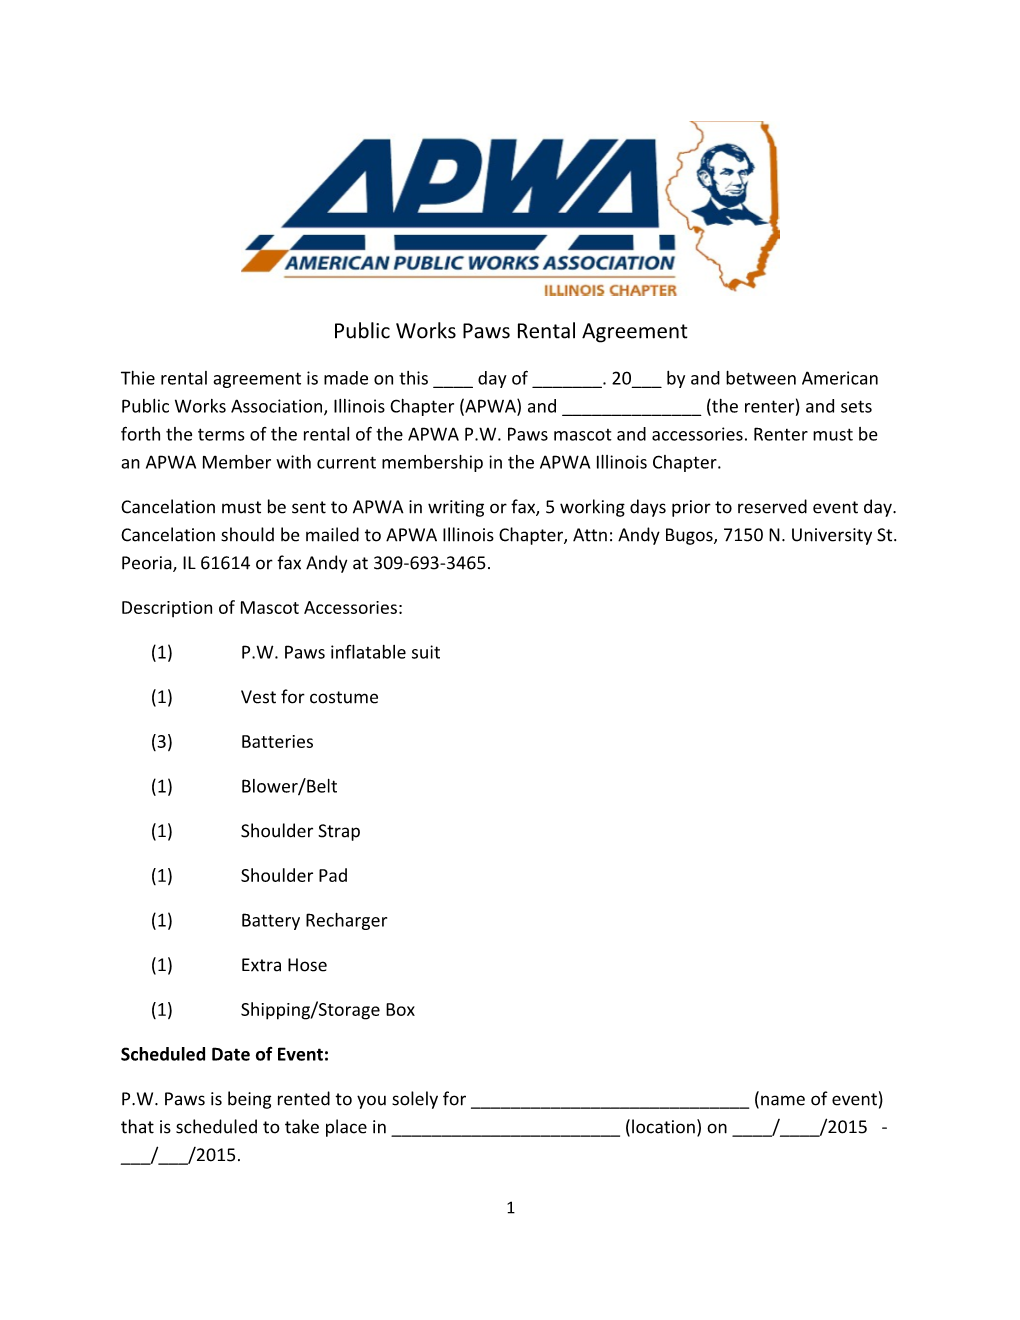 Public Works Paws Rental Agreement